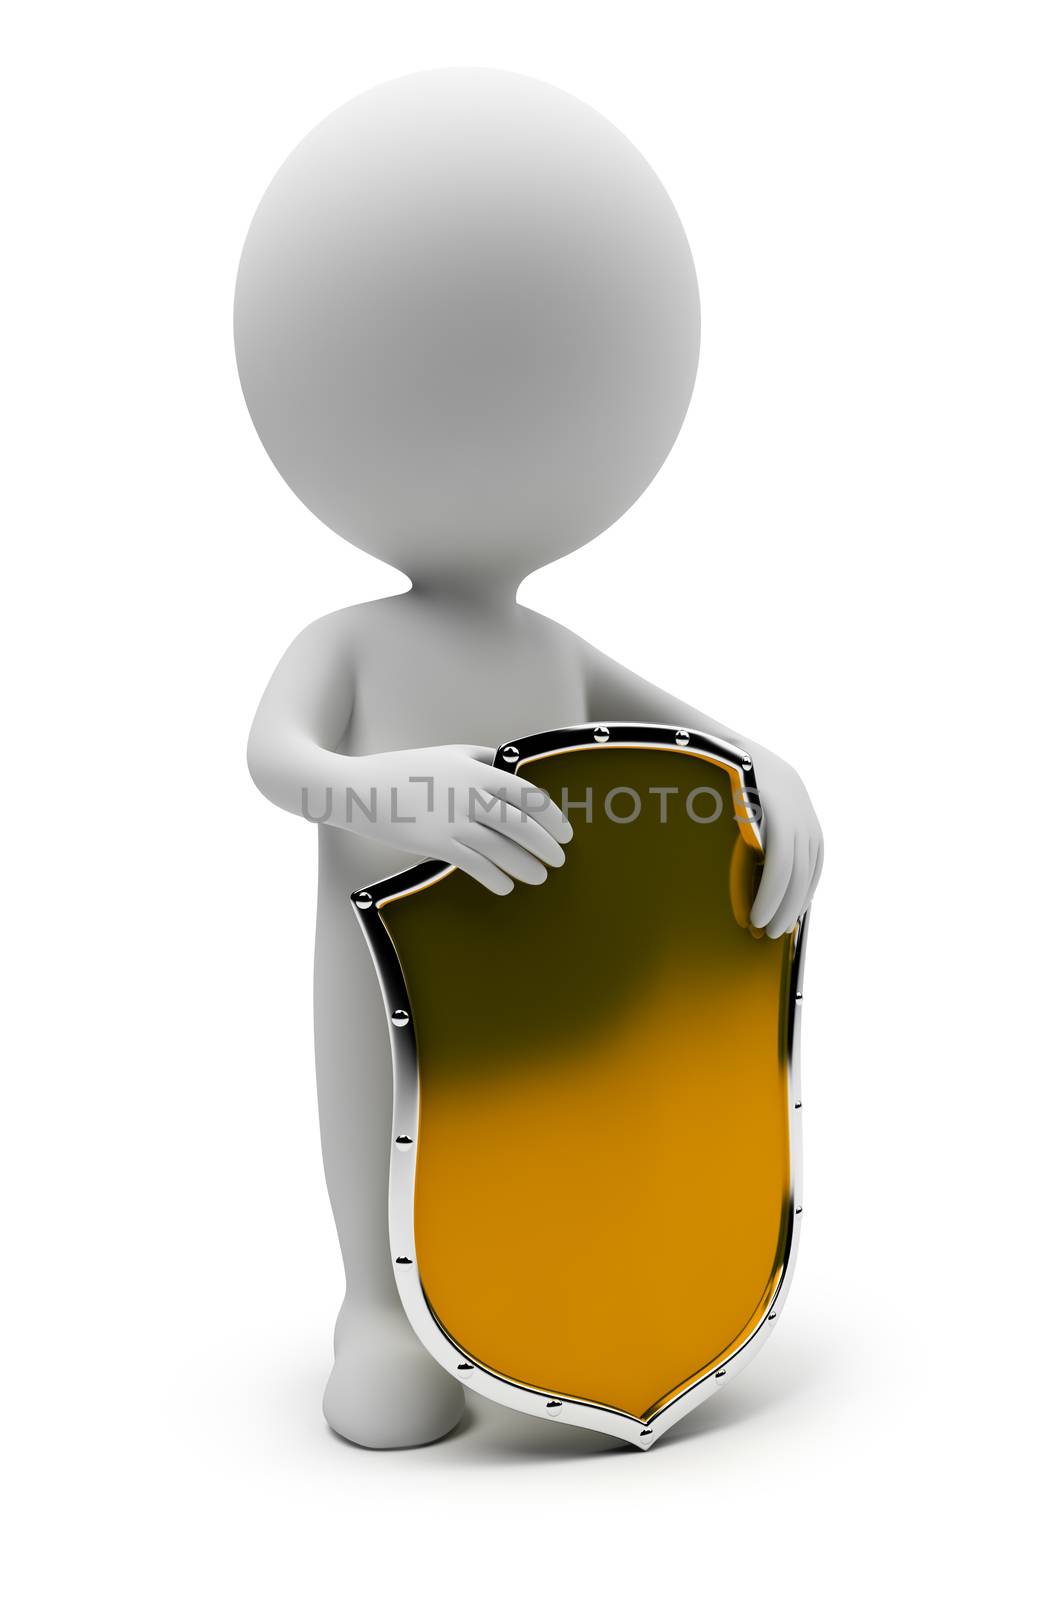 3d small people with a gold shield. 3d image. Isolated white background.